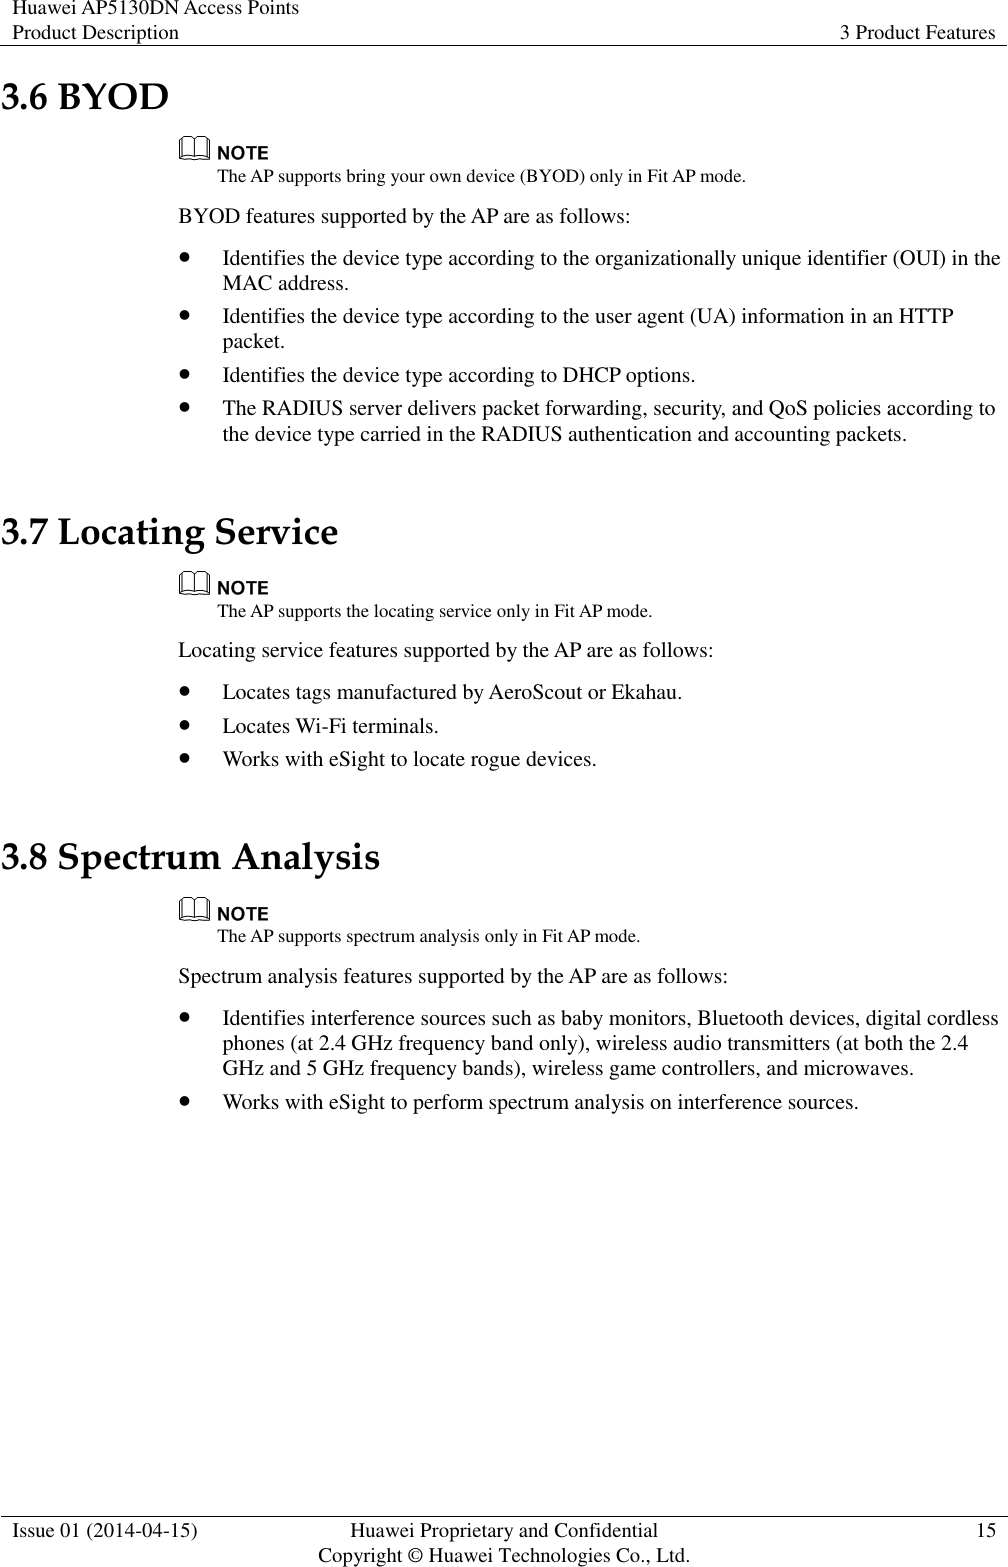 Huawei AP5130DN Access Points Product Description 3 Product Features  Issue 01 (2014-04-15) Huawei Proprietary and Confidential                                     Copyright © Huawei Technologies Co., Ltd. 15  3.6 BYOD  The AP supports bring your own device (BYOD) only in Fit AP mode. BYOD features supported by the AP are as follows:  Identifies the device type according to the organizationally unique identifier (OUI) in the MAC address.  Identifies the device type according to the user agent (UA) information in an HTTP packet.  Identifies the device type according to DHCP options.  The RADIUS server delivers packet forwarding, security, and QoS policies according to the device type carried in the RADIUS authentication and accounting packets. 3.7 Locating Service  The AP supports the locating service only in Fit AP mode. Locating service features supported by the AP are as follows:  Locates tags manufactured by AeroScout or Ekahau.  Locates Wi-Fi terminals.  Works with eSight to locate rogue devices. 3.8 Spectrum Analysis  The AP supports spectrum analysis only in Fit AP mode. Spectrum analysis features supported by the AP are as follows:  Identifies interference sources such as baby monitors, Bluetooth devices, digital cordless phones (at 2.4 GHz frequency band only), wireless audio transmitters (at both the 2.4 GHz and 5 GHz frequency bands), wireless game controllers, and microwaves.  Works with eSight to perform spectrum analysis on interference sources. 